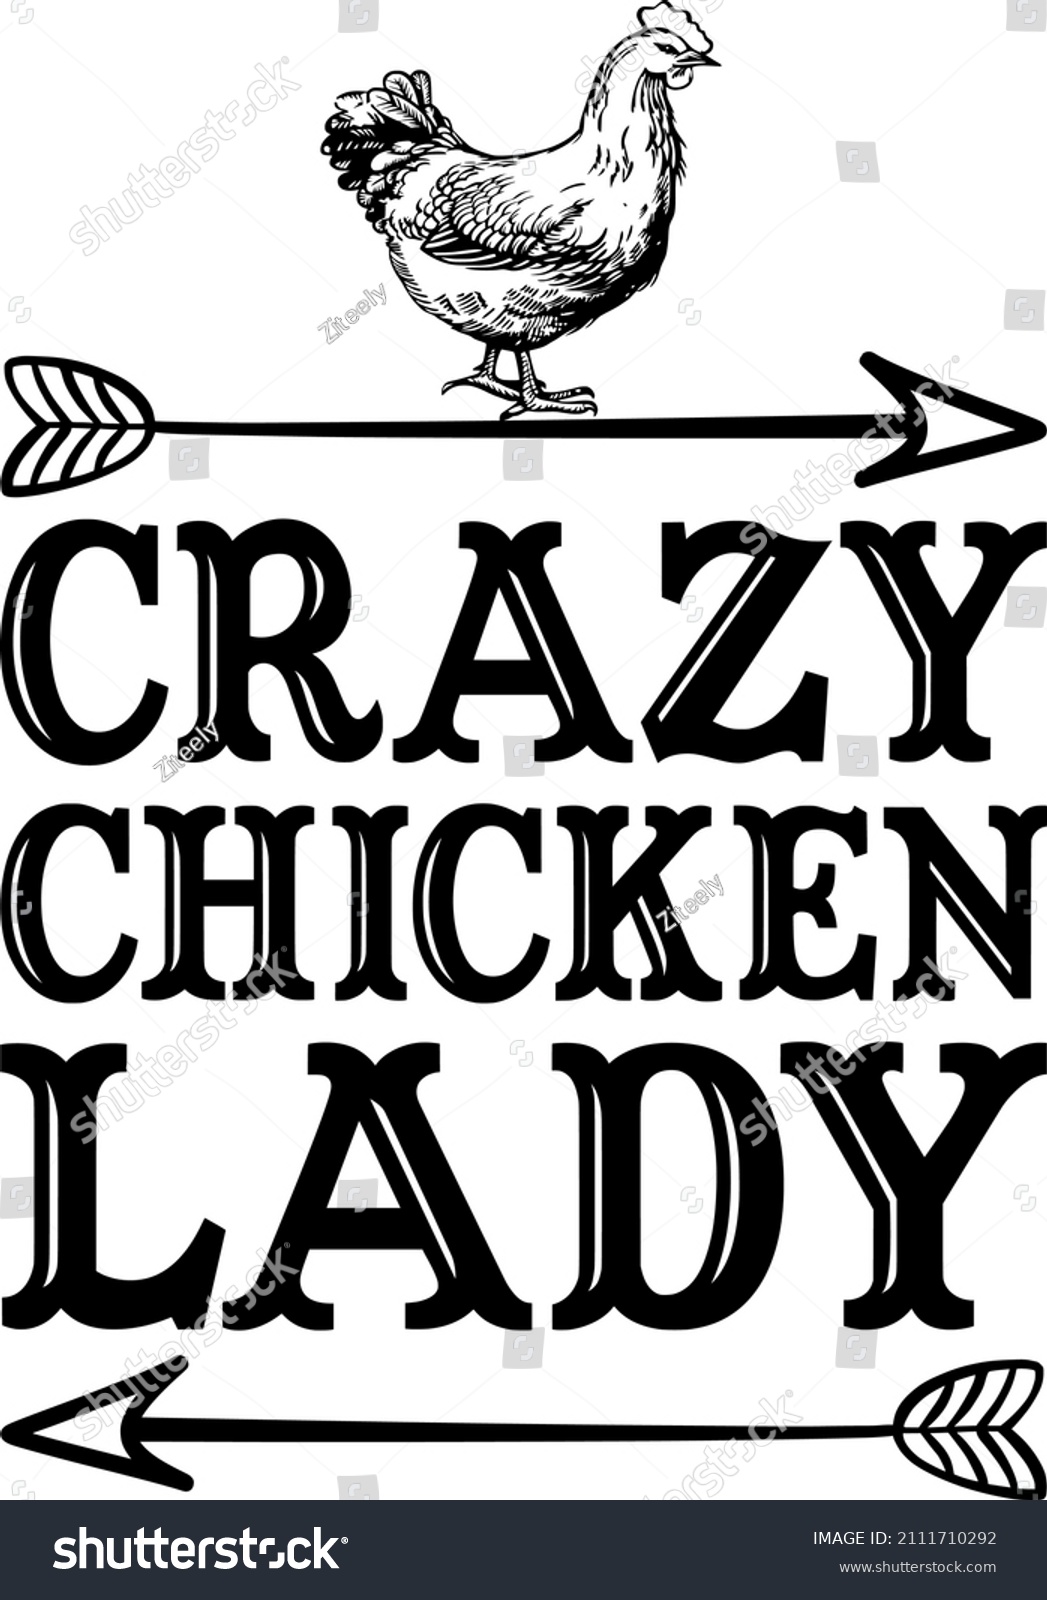 SVG of Crazy Chicken Lady

Trending vector quote on white background for t shirt, mug, stickers etc svg